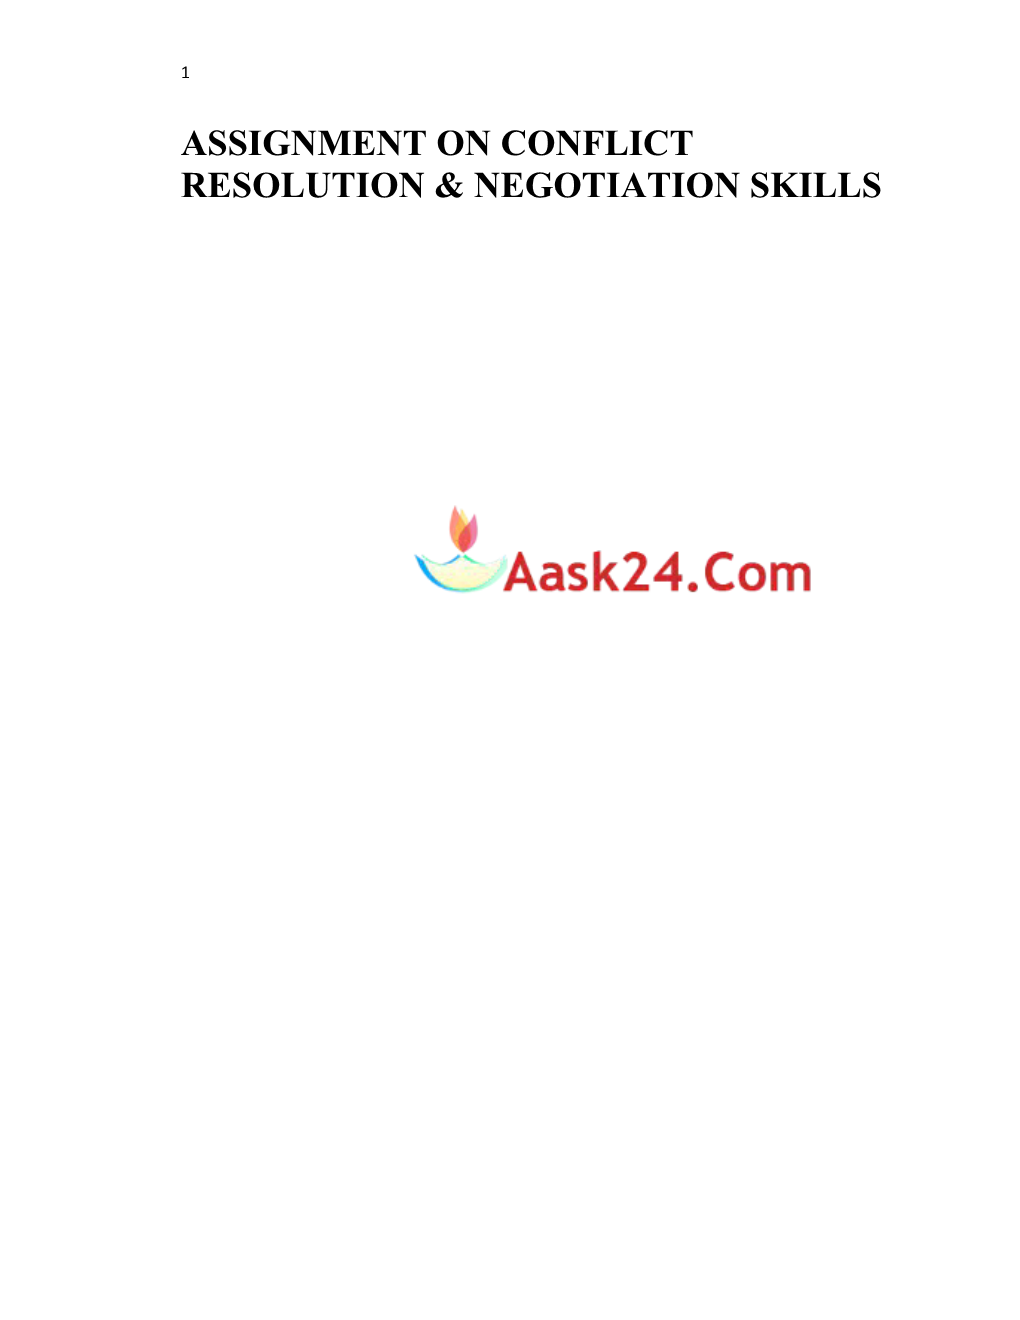 Assignment on Conflict Resolution & Negotiation Skills